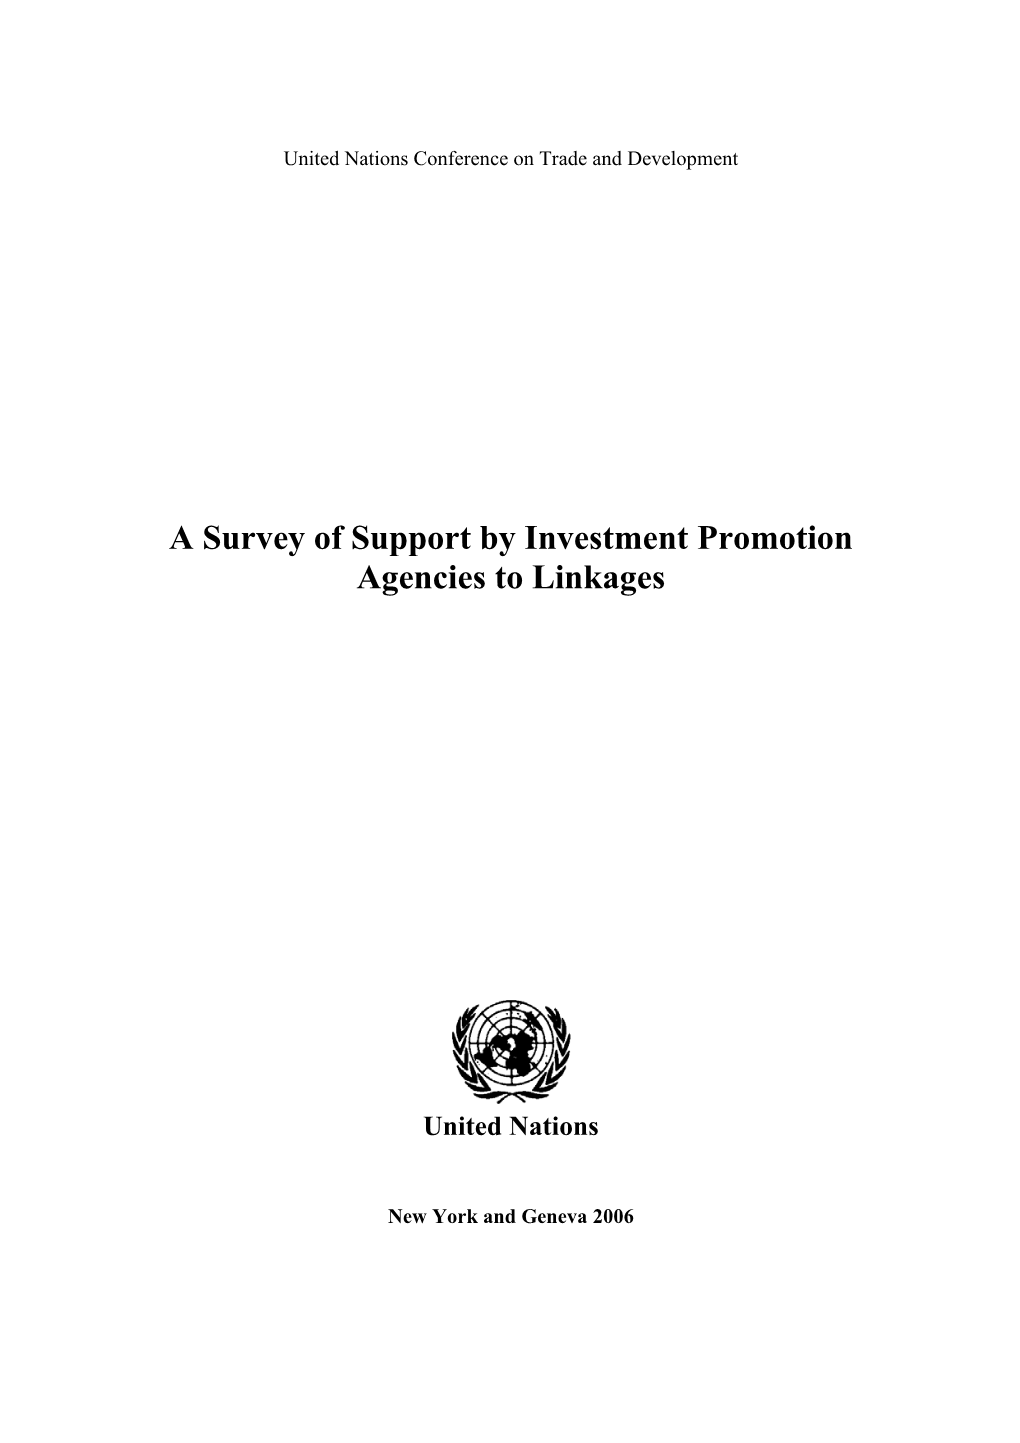 A Survey of Support by Investment Promotion Agencies to Linkages